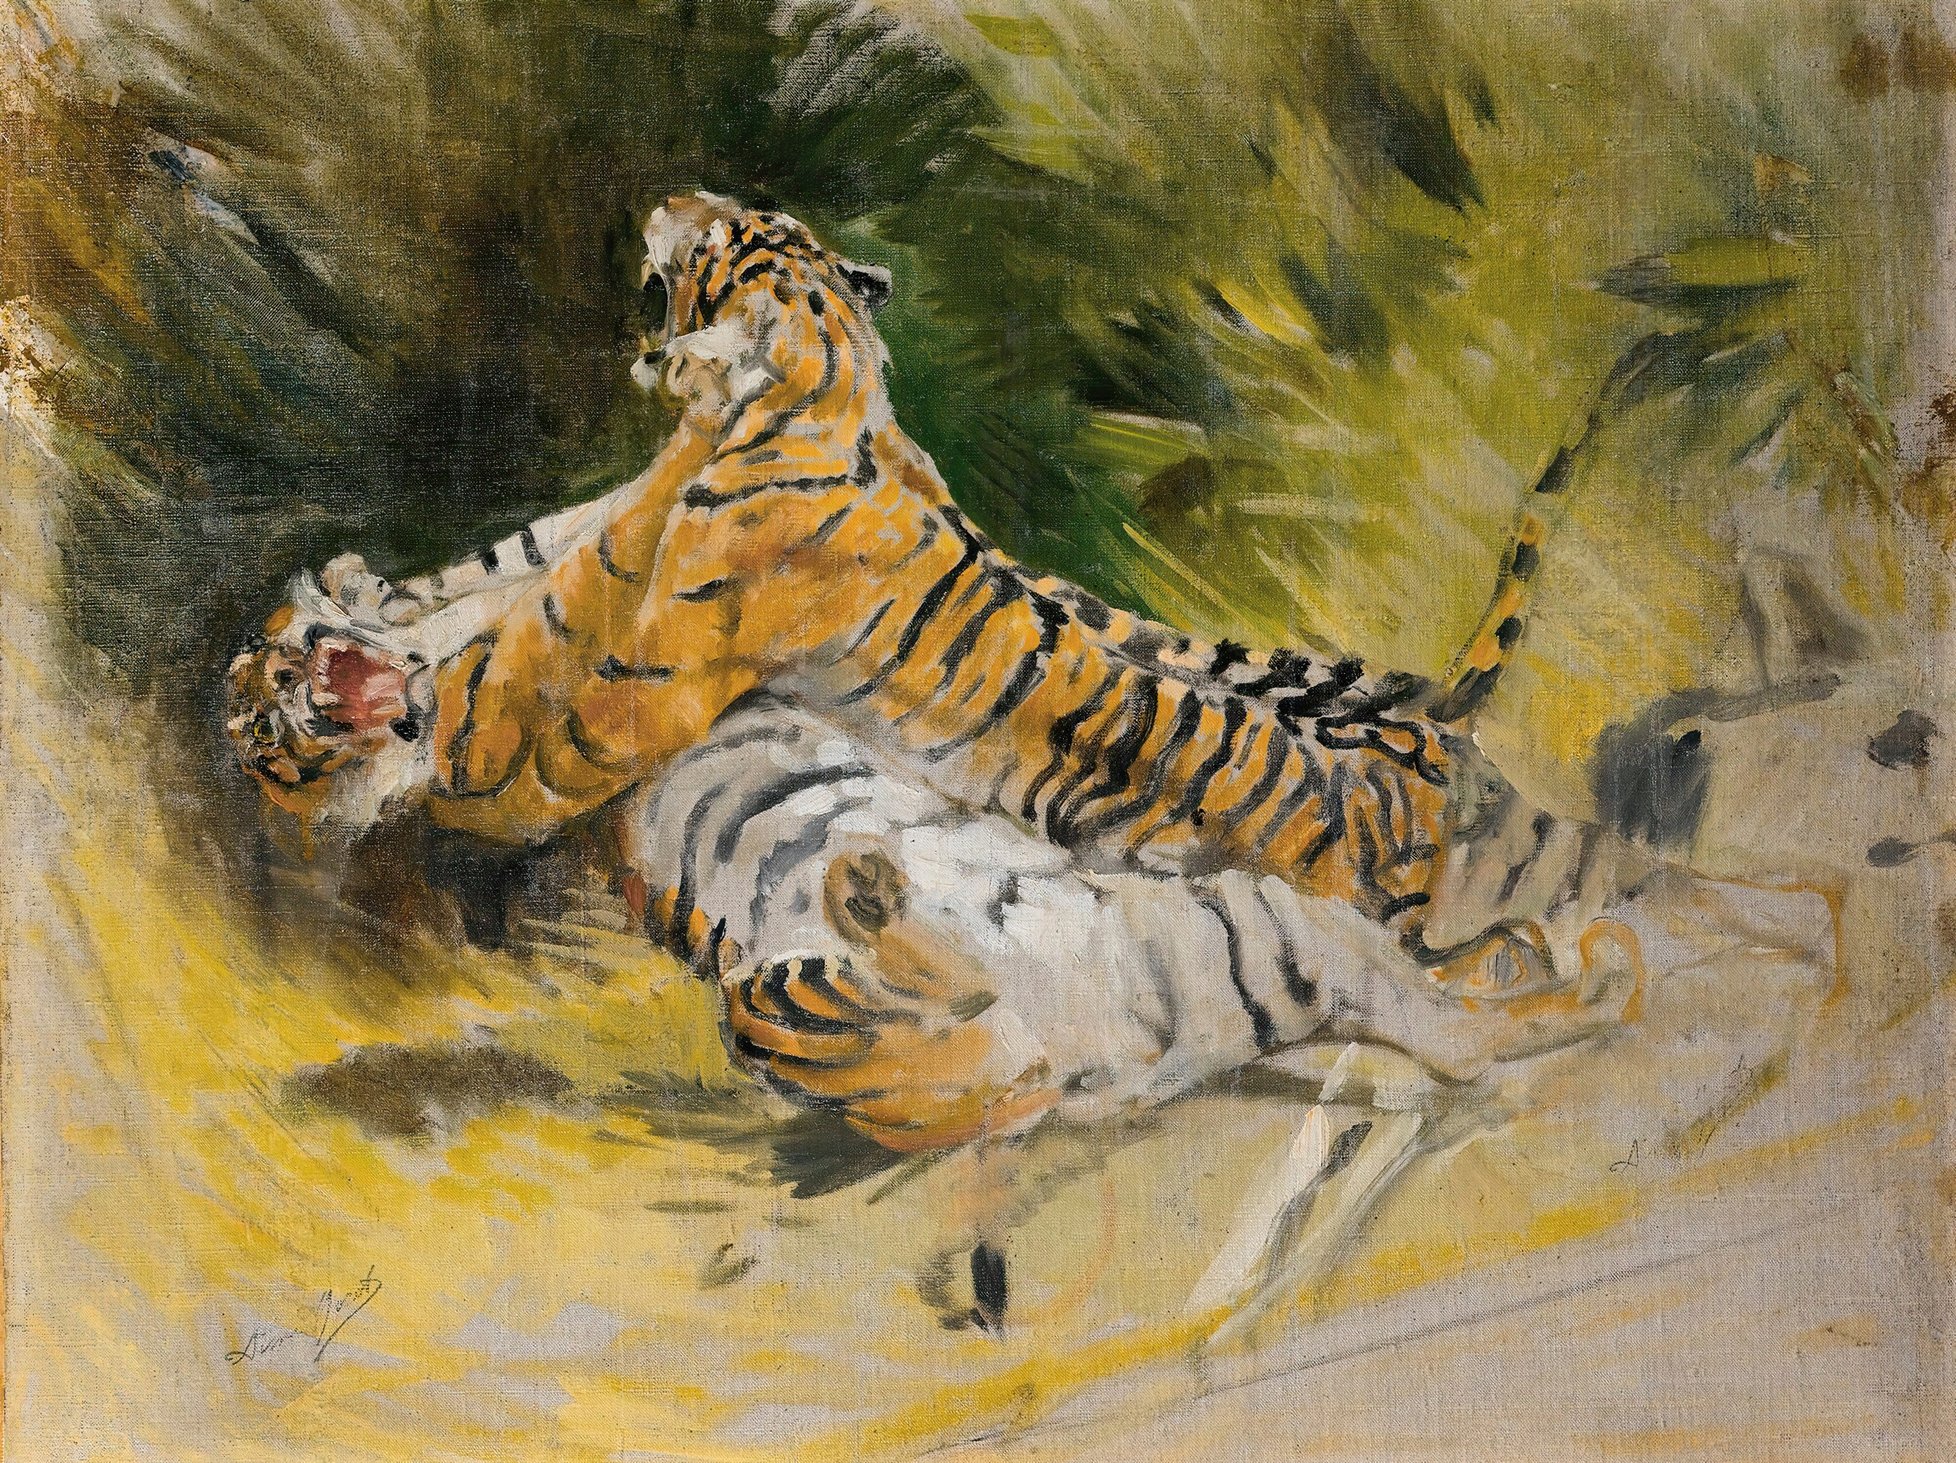 Two tigers fighting